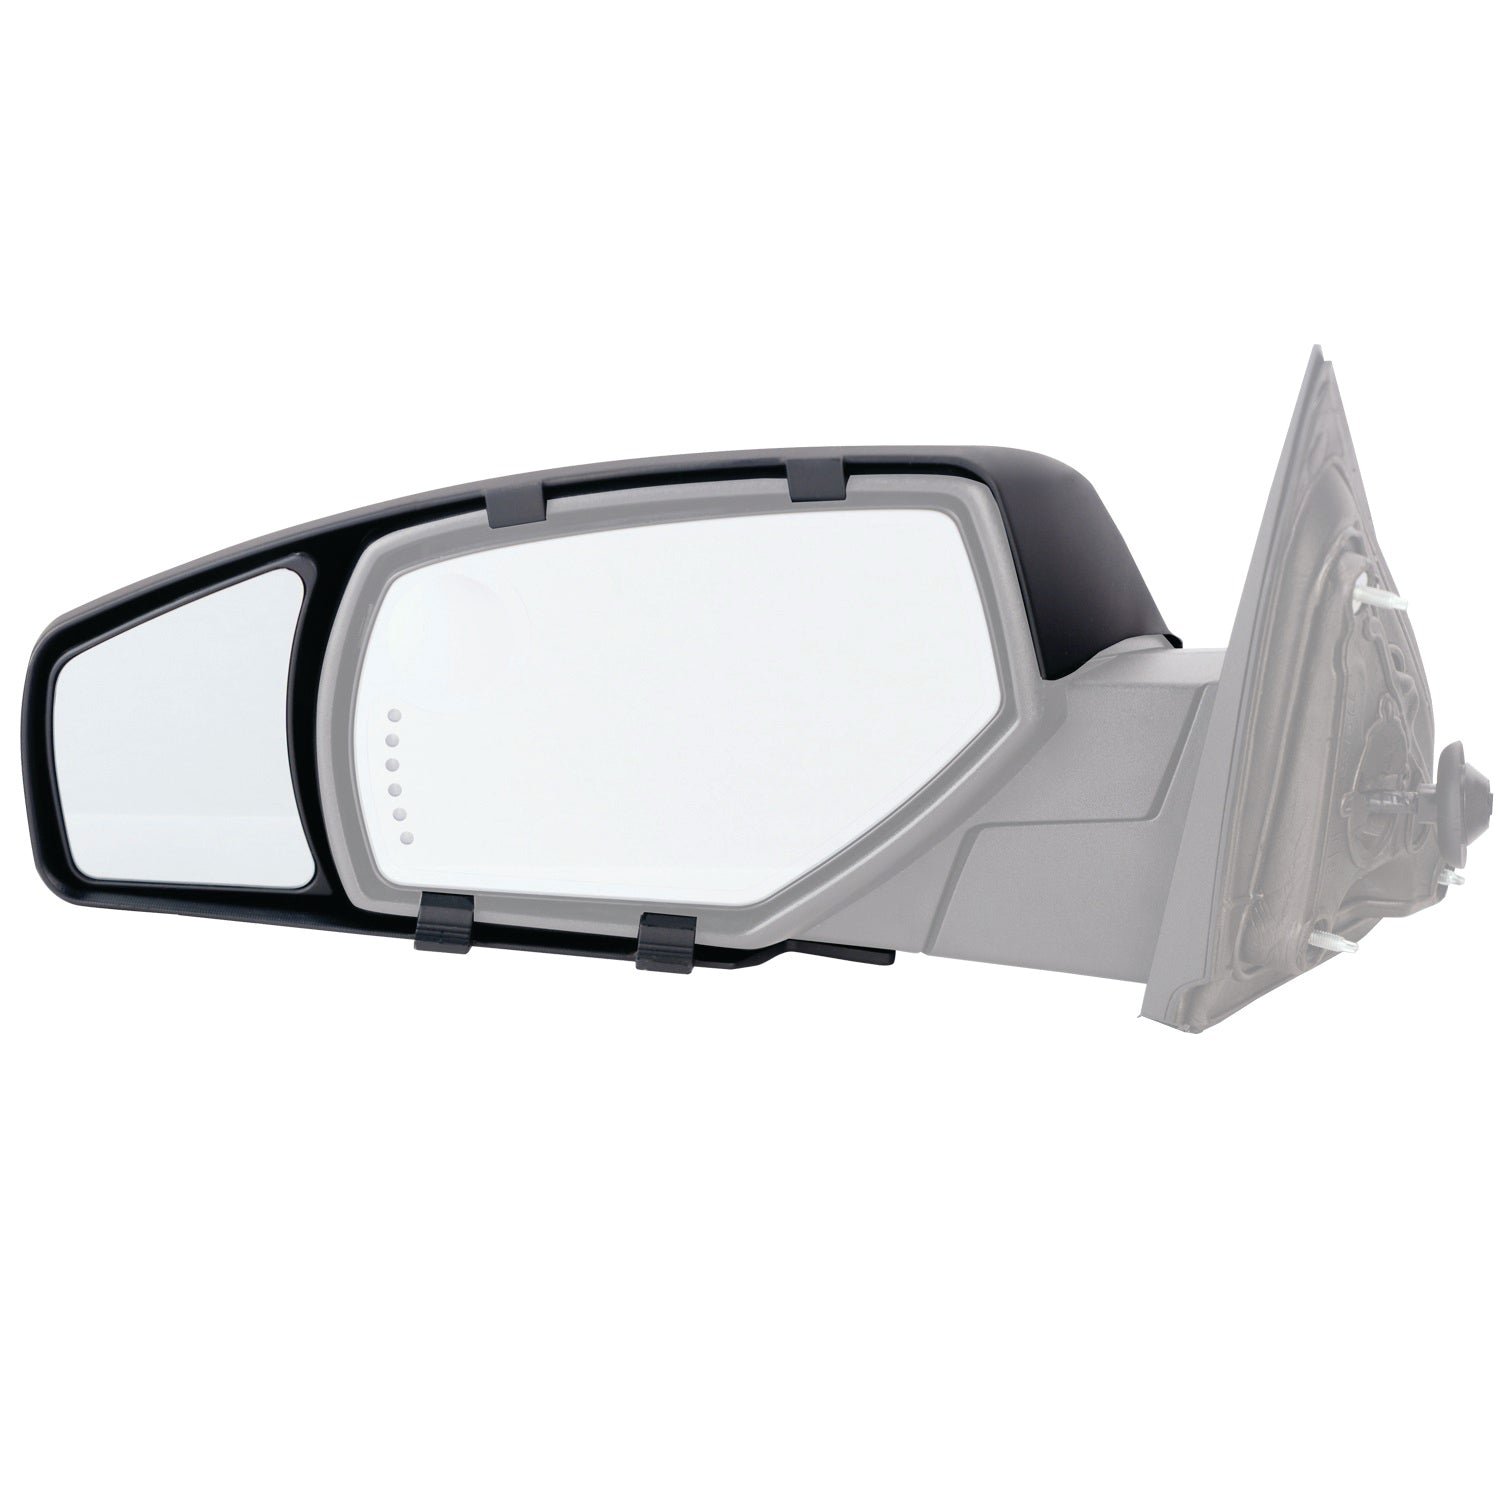 K-Source 80920 Snap-On Towing Mirrors For Select Chevy/GMC Models (15+)